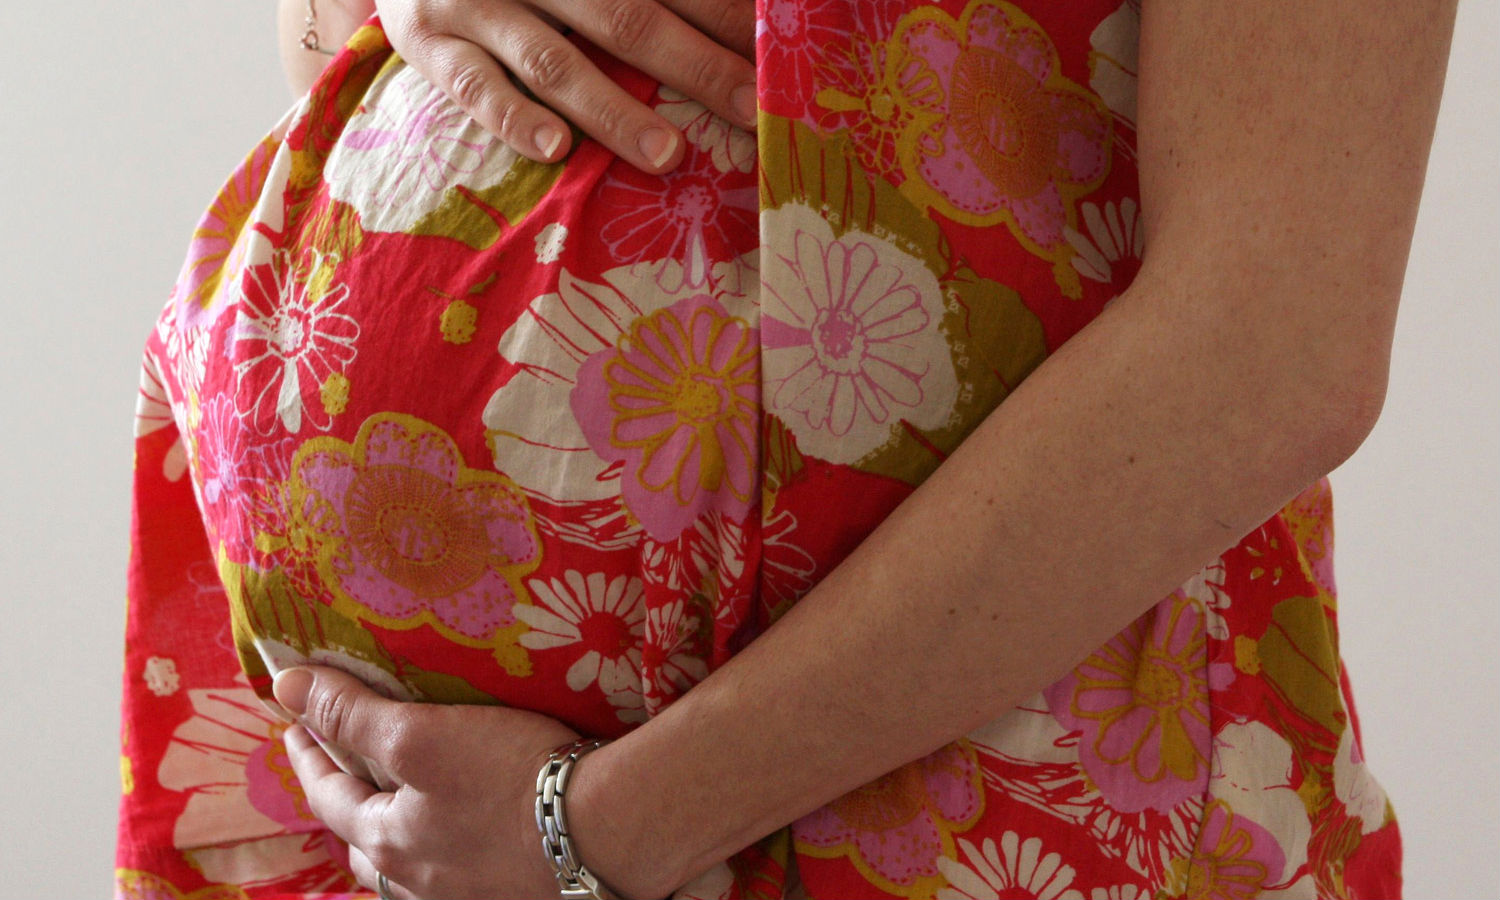 For Tennessee Lawmakers, Punishing Pregnant Women Is More Important Than Protecting Fetal Life